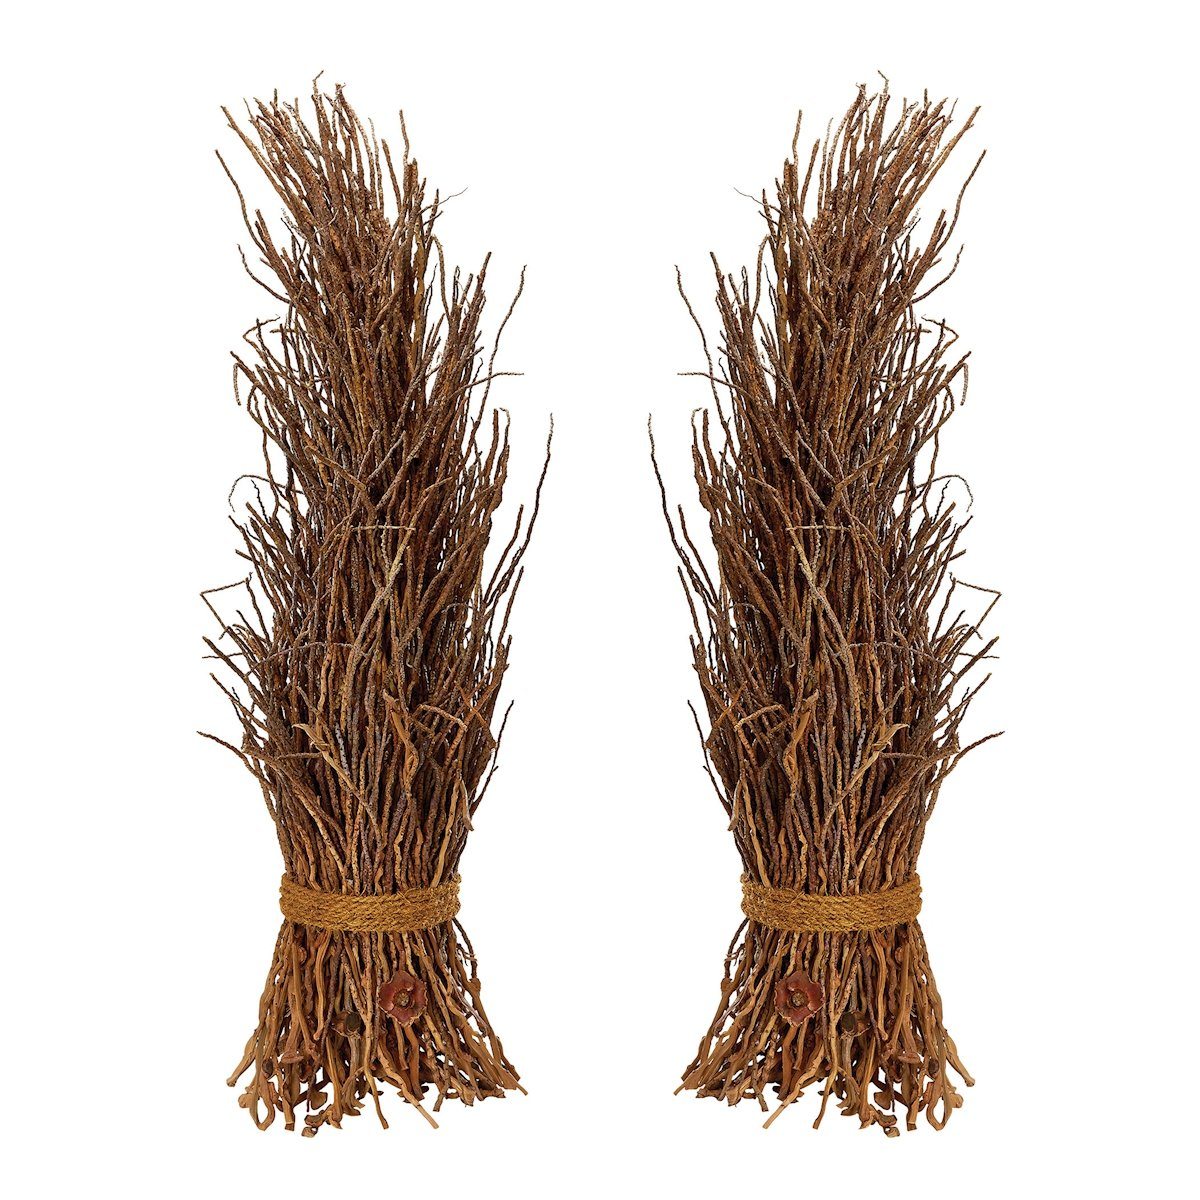 Natural Cocoa Twig Sheaf - Set of 2 Accessories Dimond Home 